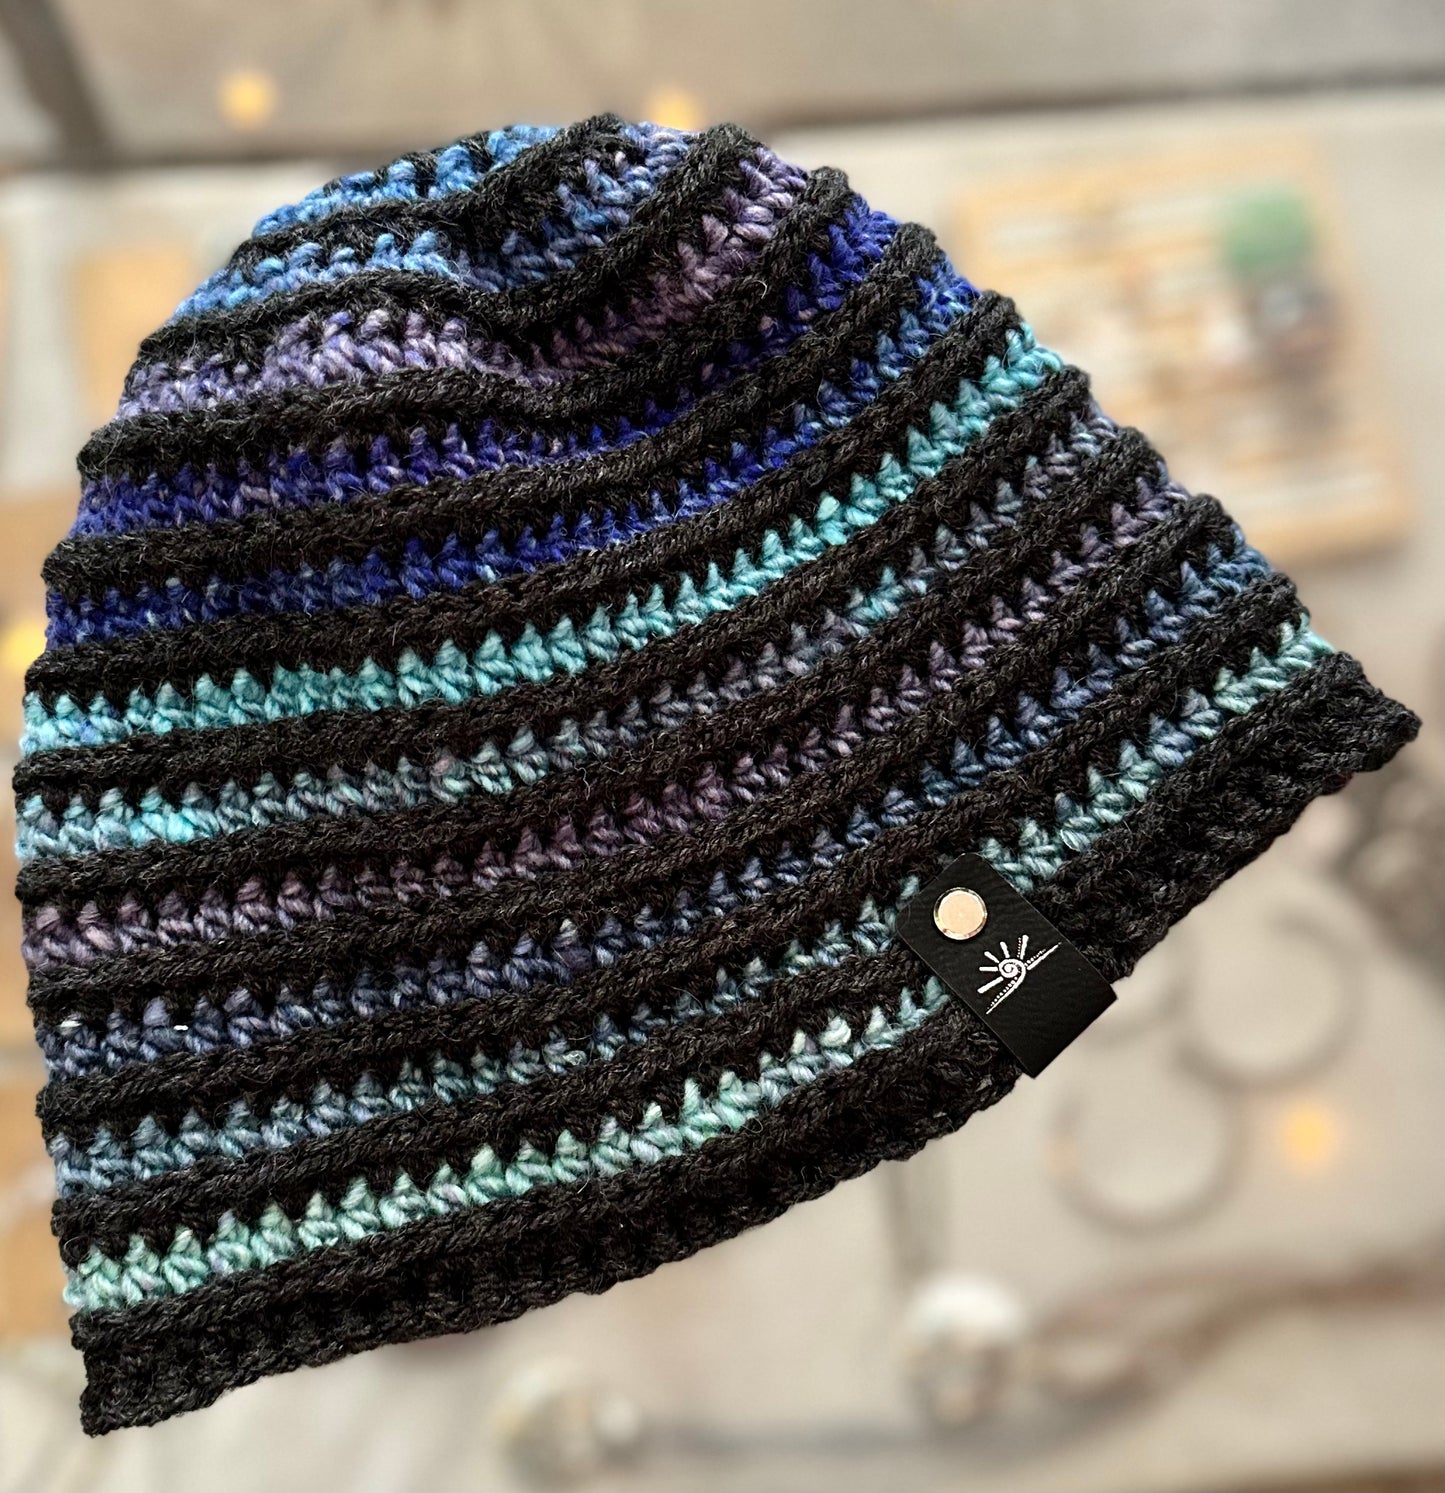 Charcoal Black and Blue dyed Yarn Crochet Hat